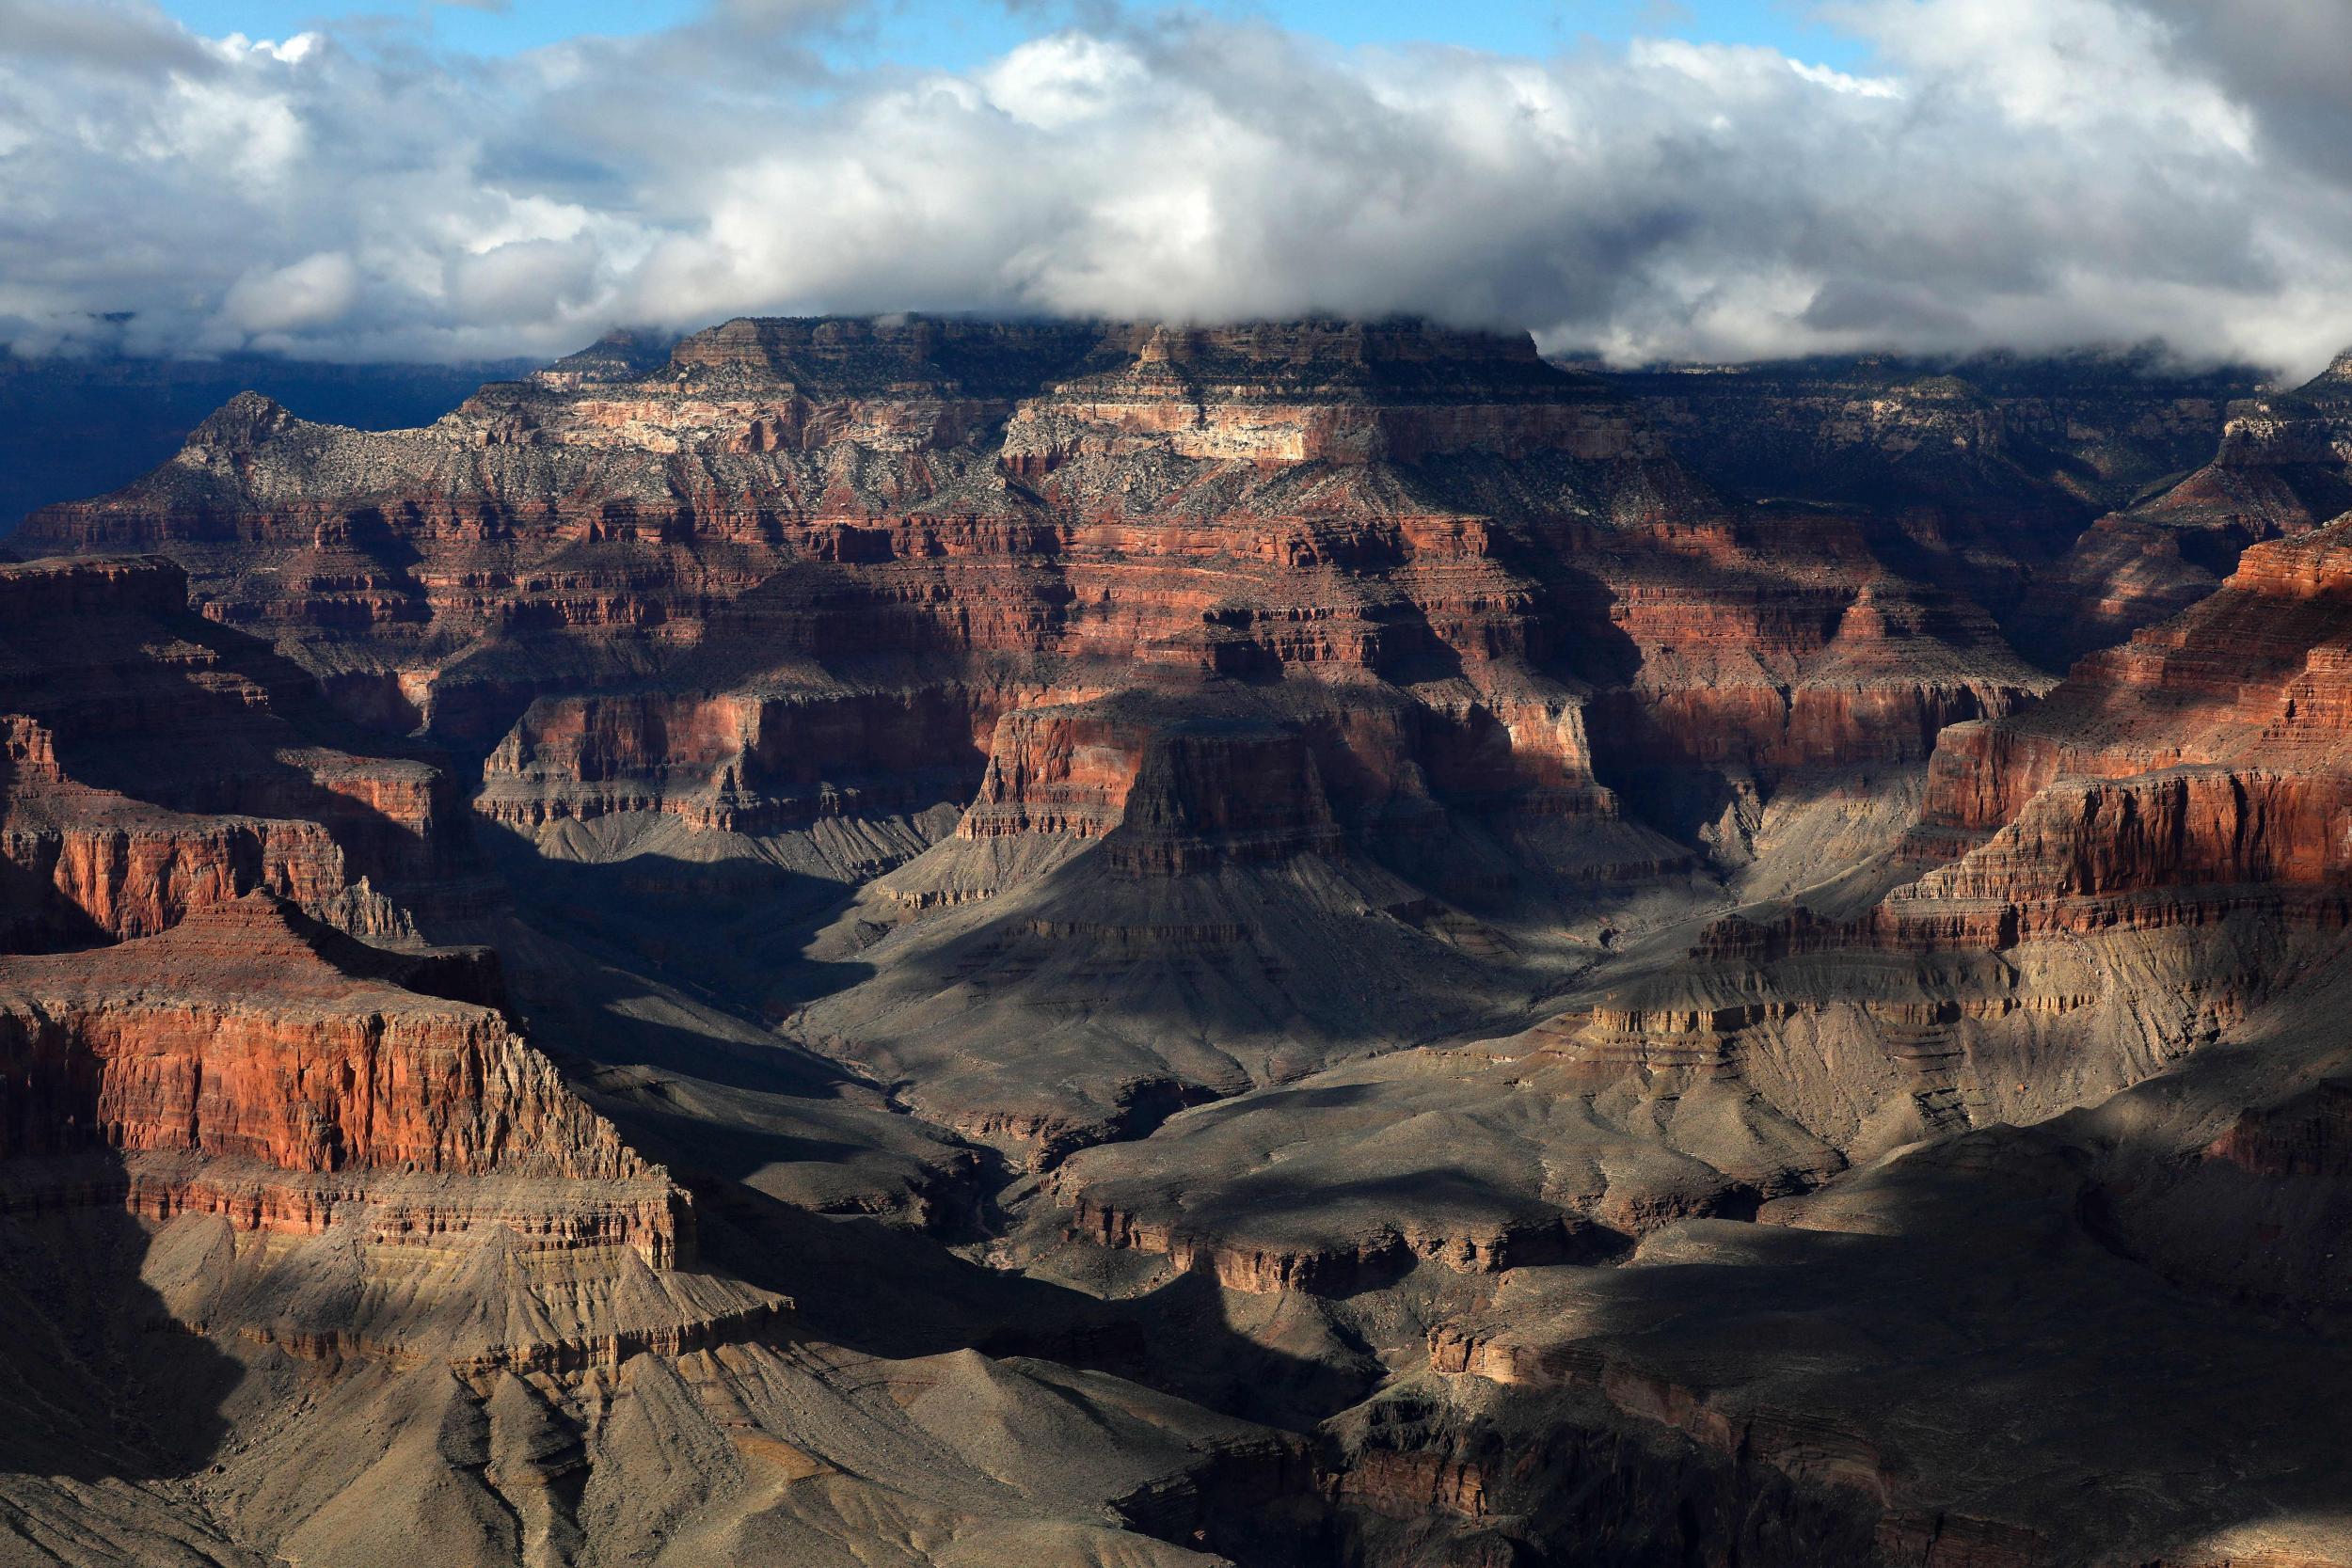 A general view of the South Rim of the Grand Canyon in Grand Canyon National Park, Arizona (Getty)